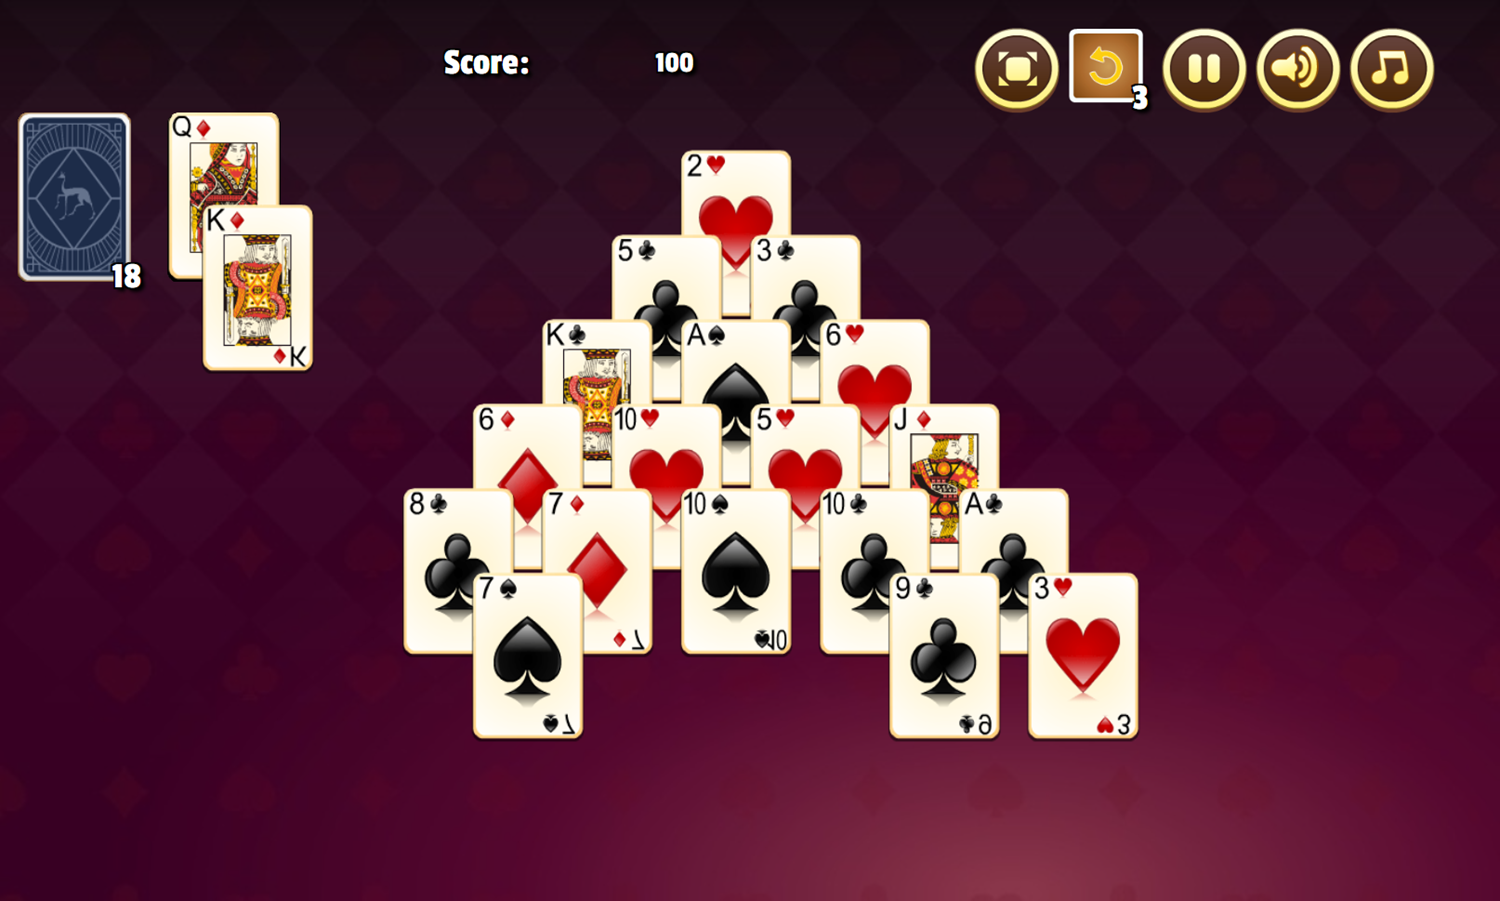 Tower Solitaire Game Play Screenshot.